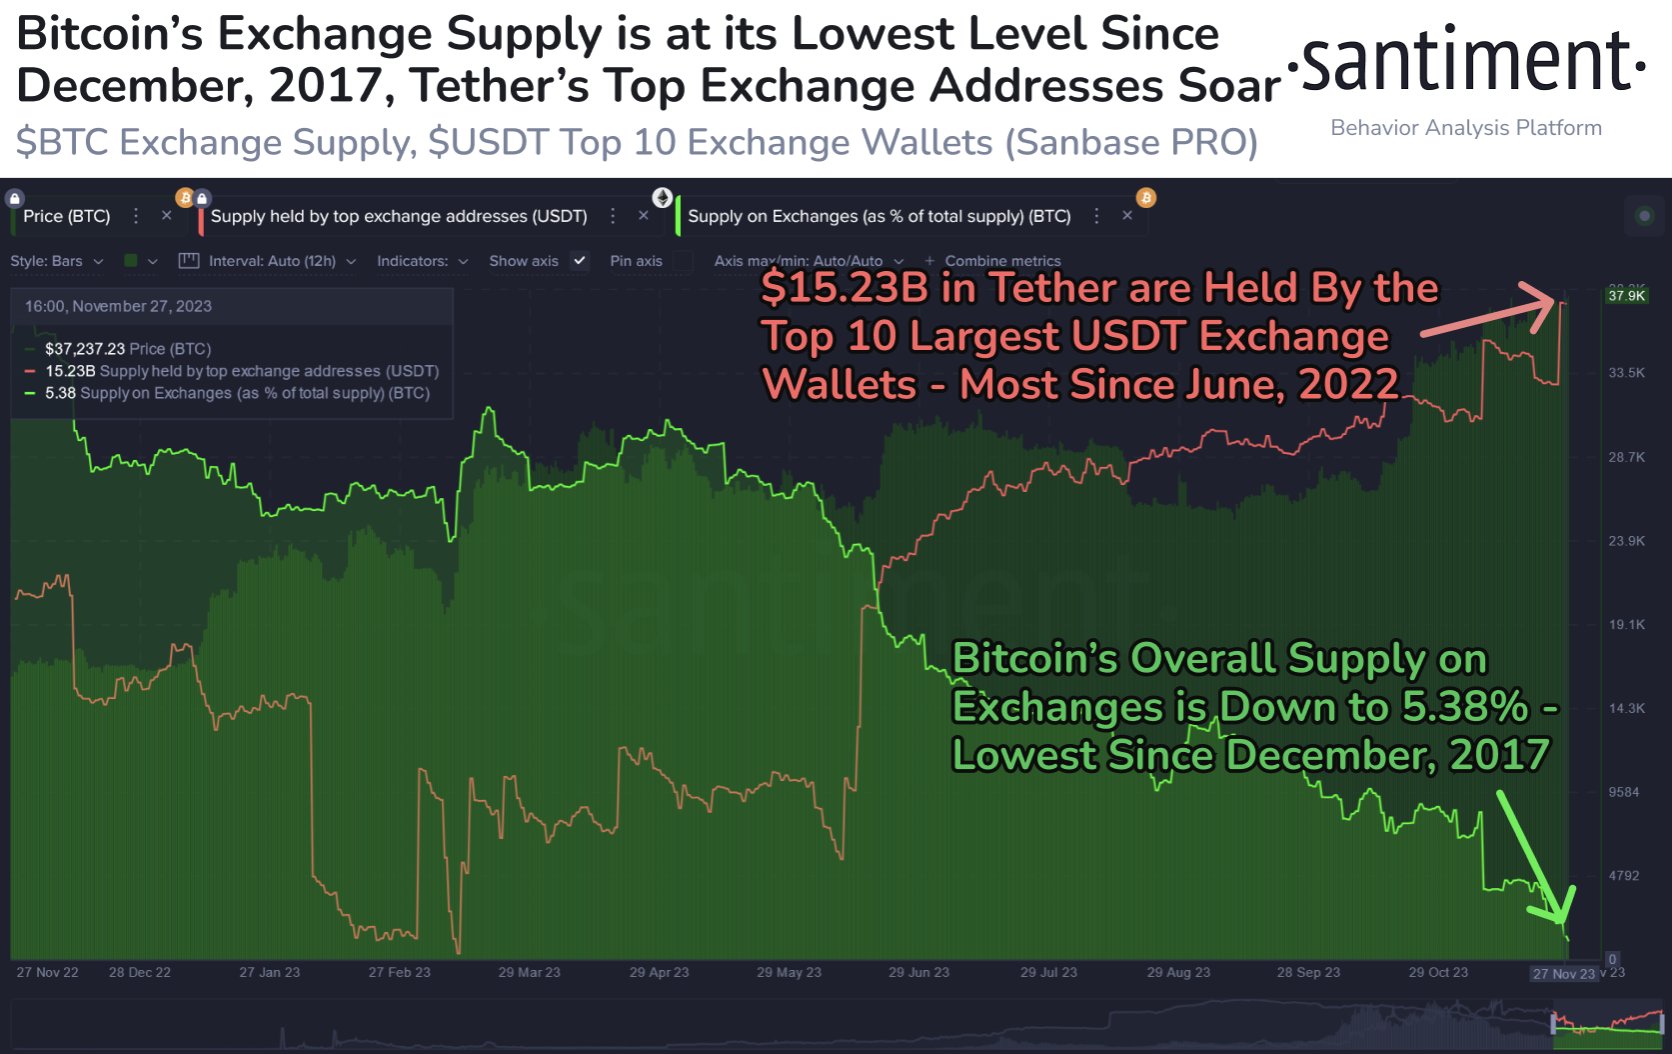 Bitcoin Supply on Exchanges